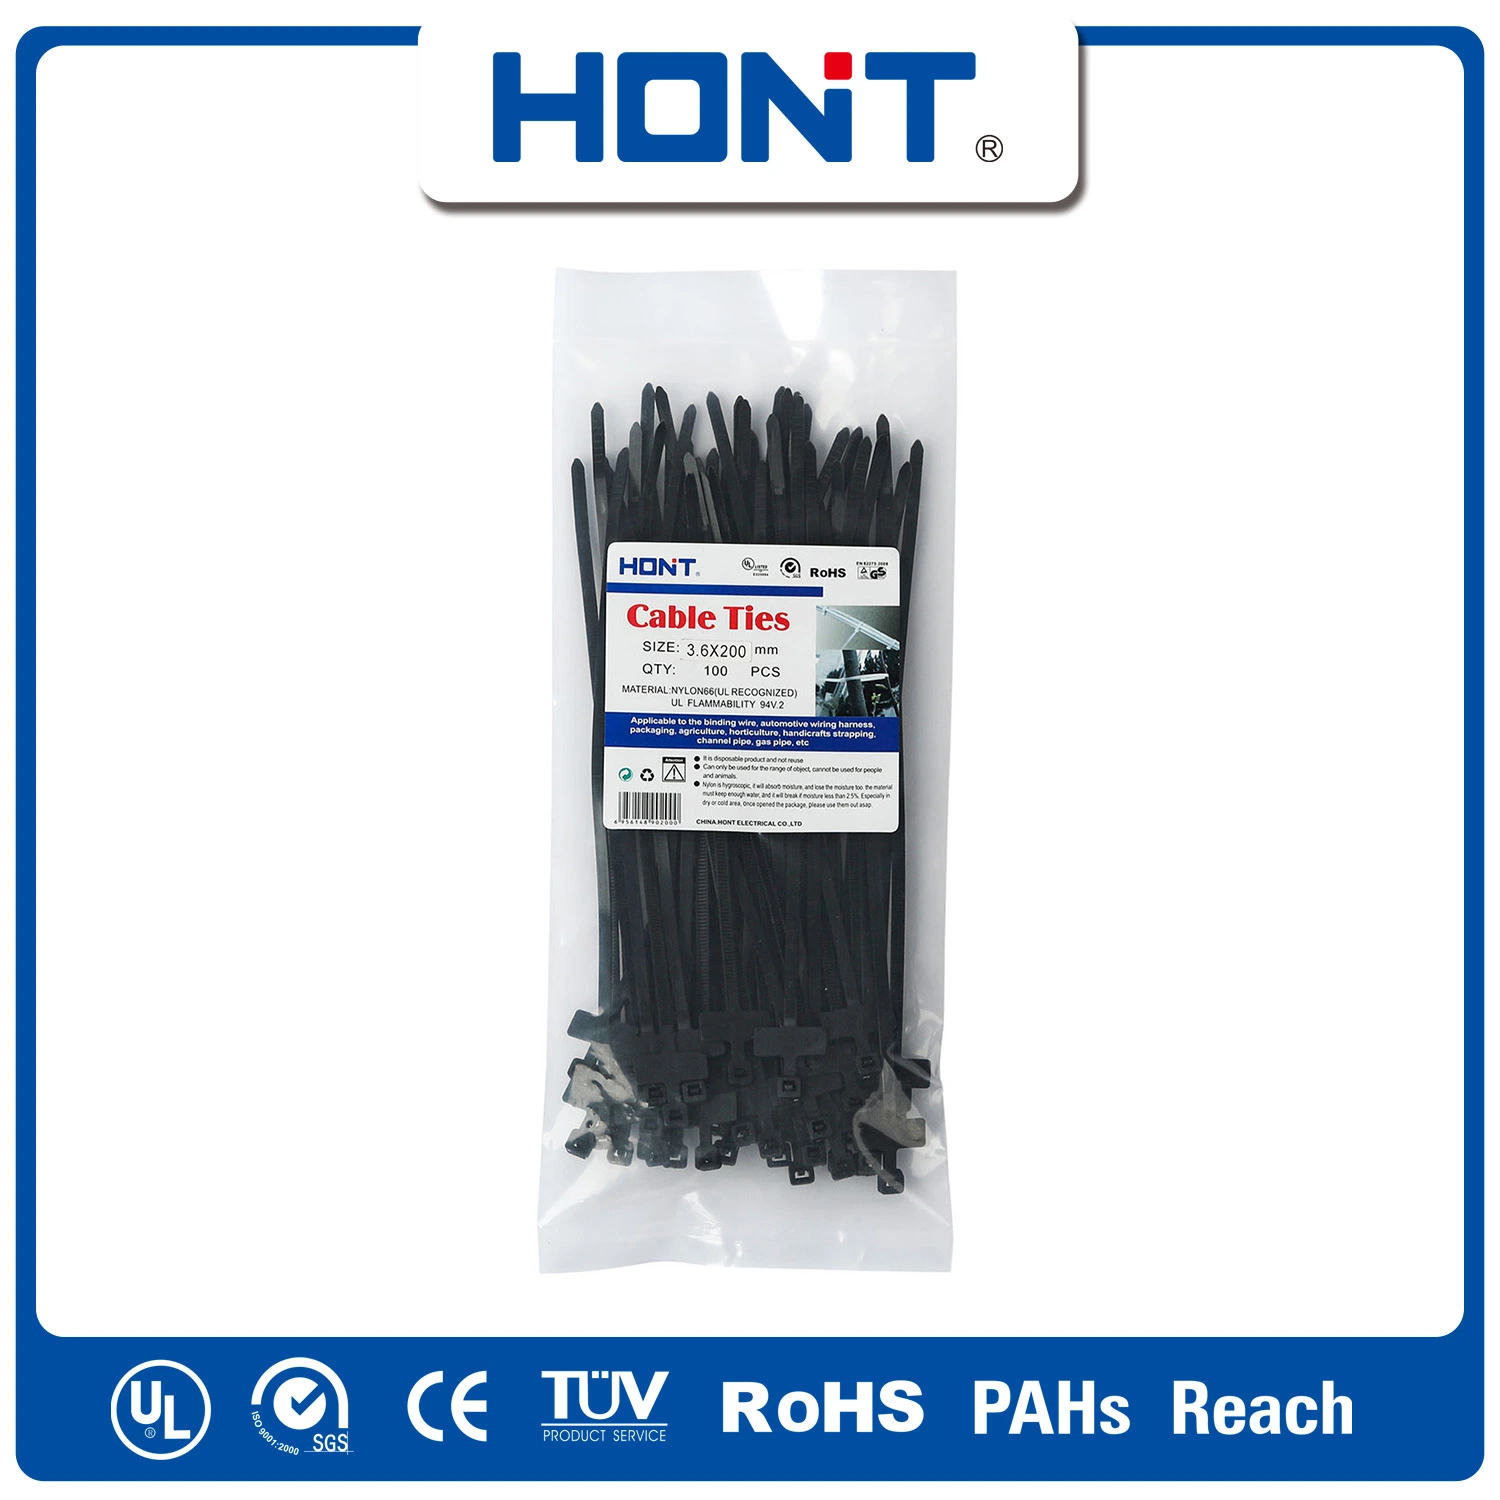 Self-Locking Tie Hont Plastic Bag + Sticker Exporting Carton/Tray Parts Cable Accessories with CCC